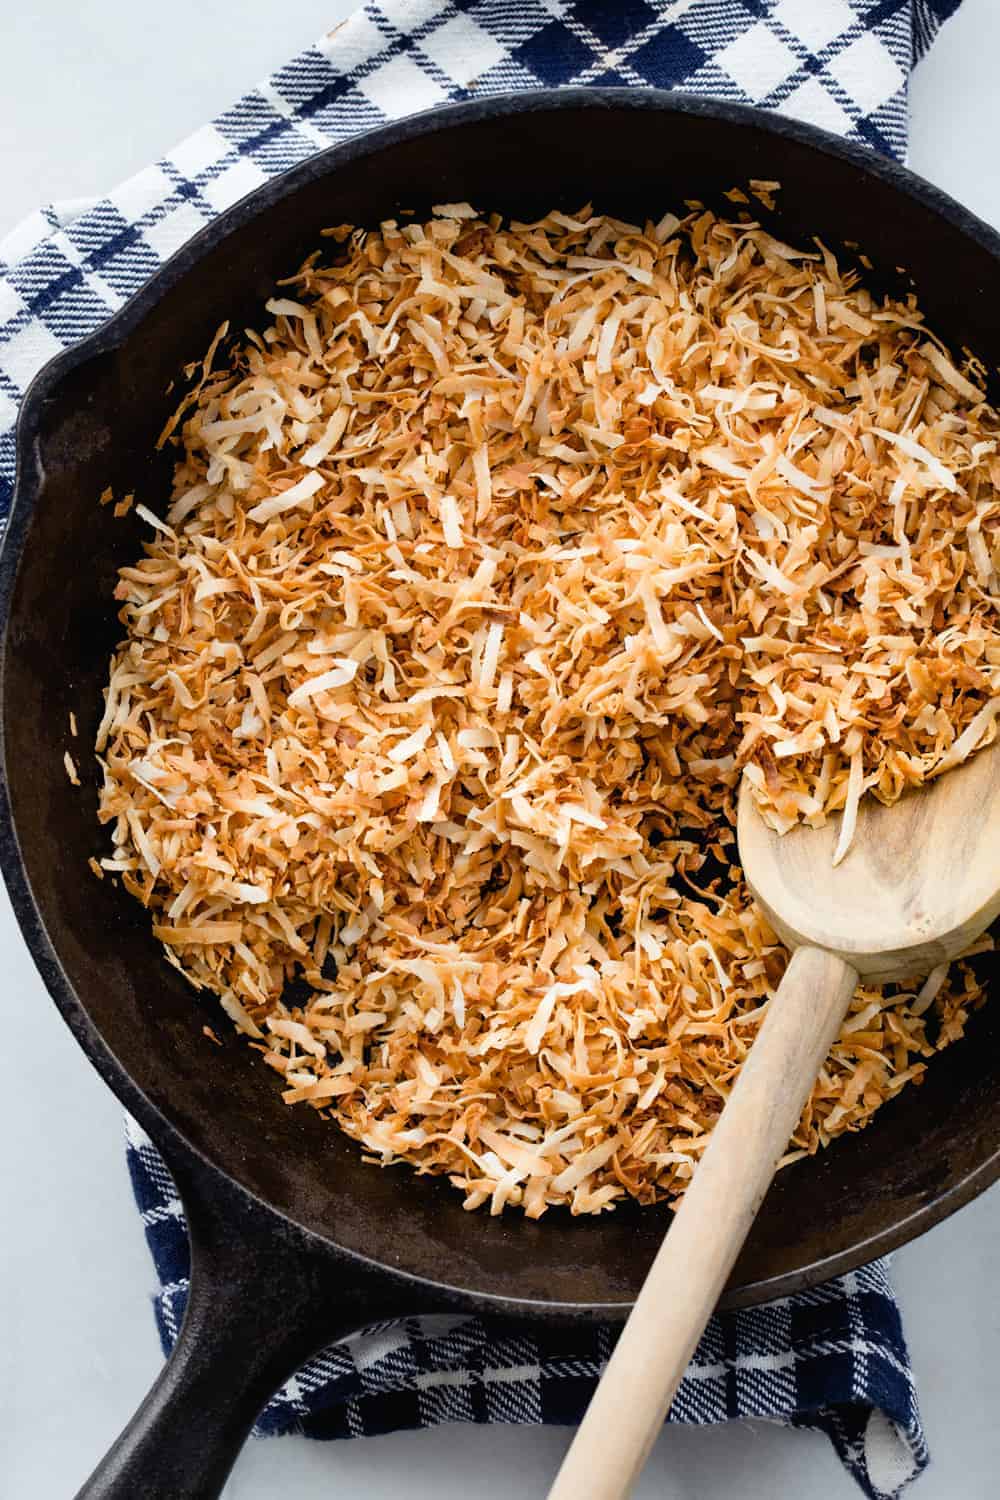 Learn how to easily toast shredded coconut using the stovetop, oven and microwave. So simple and delicious!